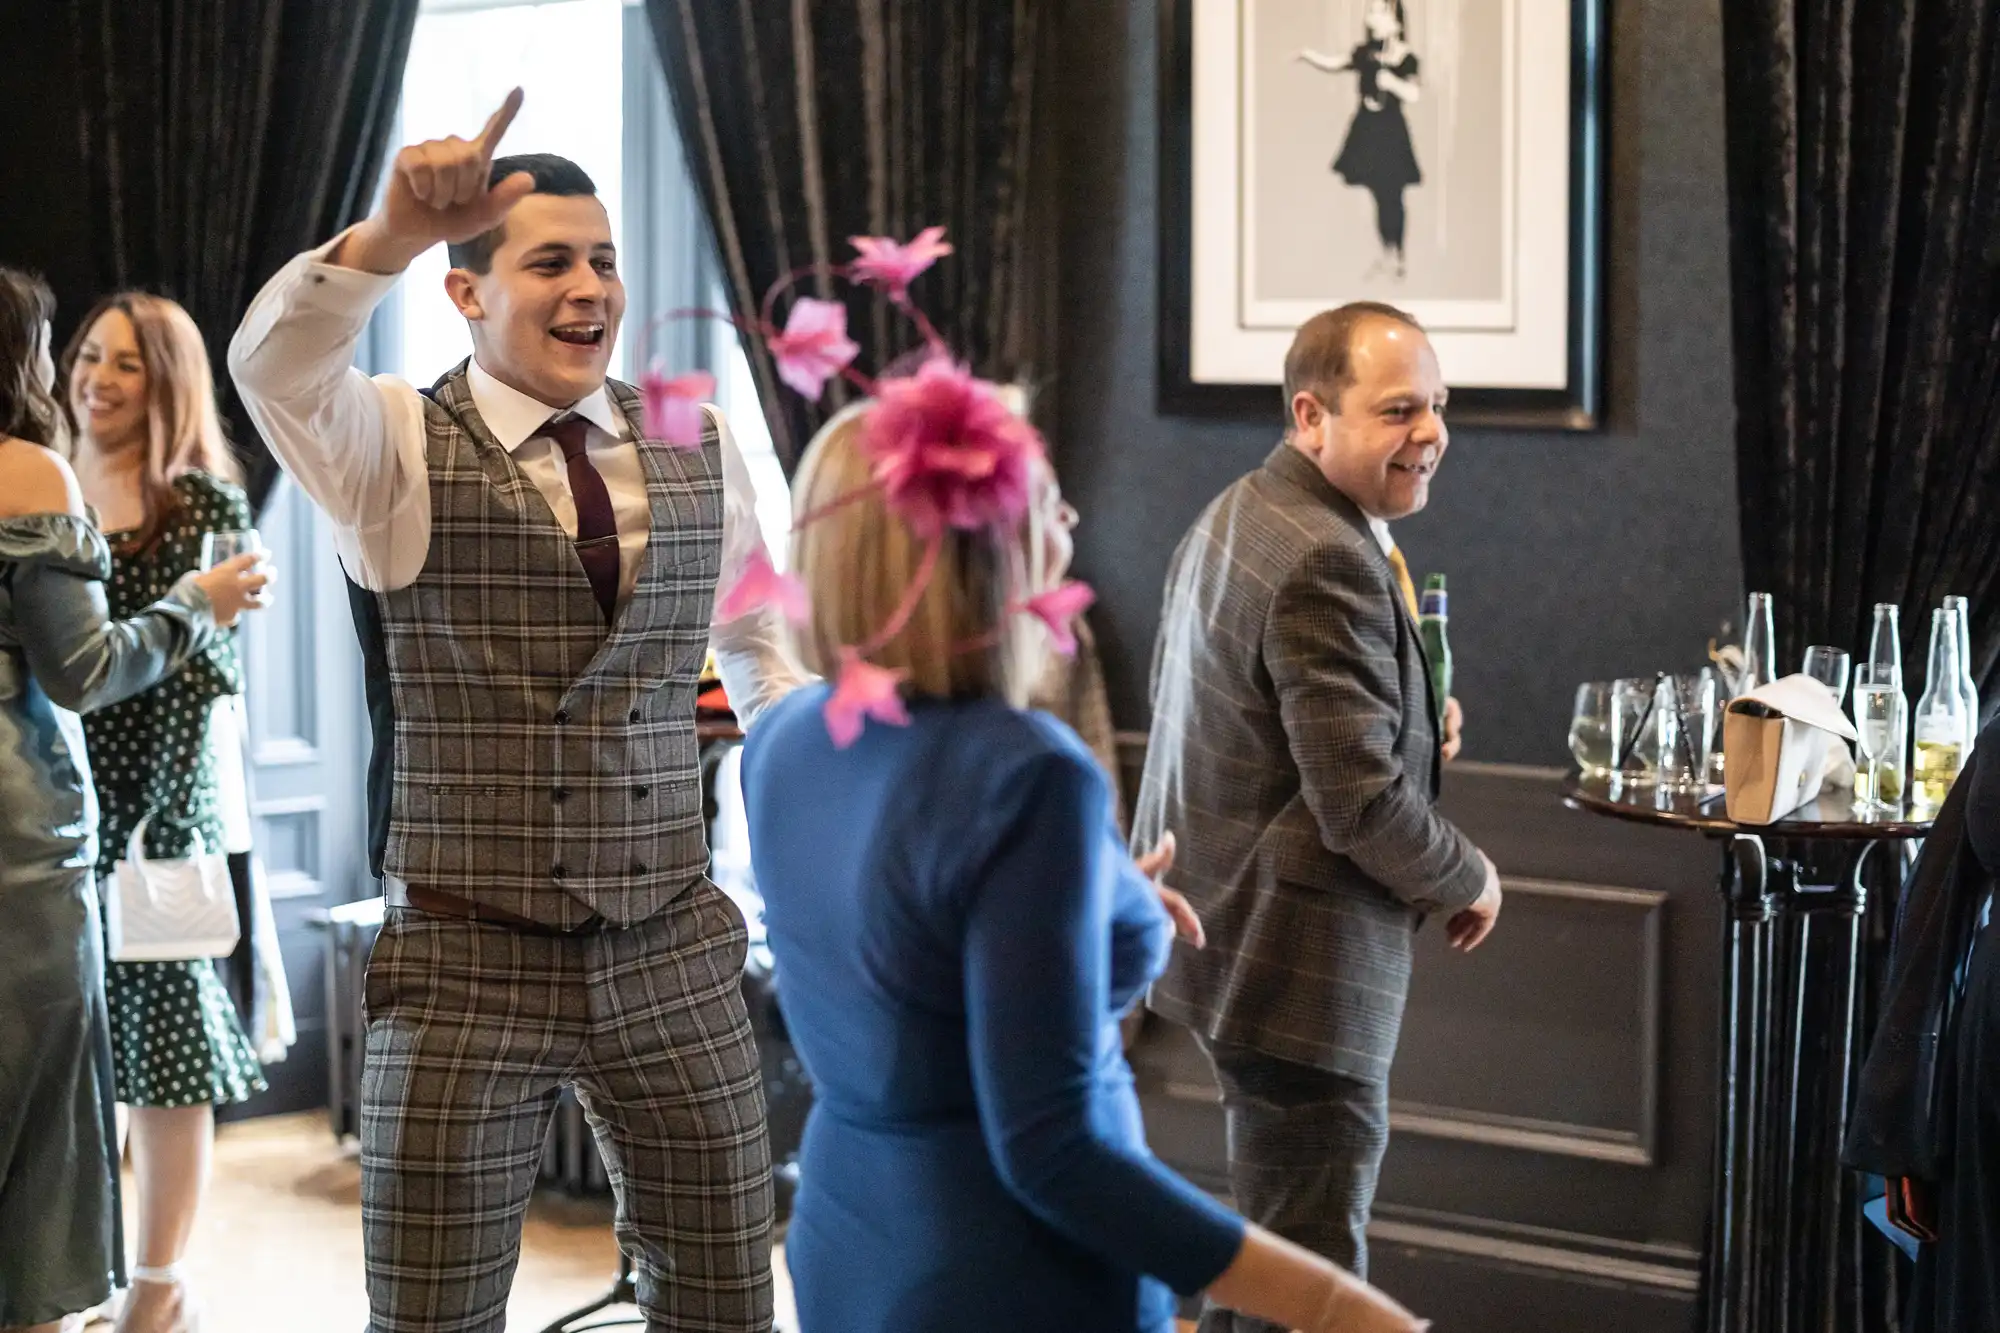 A group of people dressed formally is enjoying a social gathering. One man in a plaid suit is dancing energetically, while others are laughing and talking in the background.